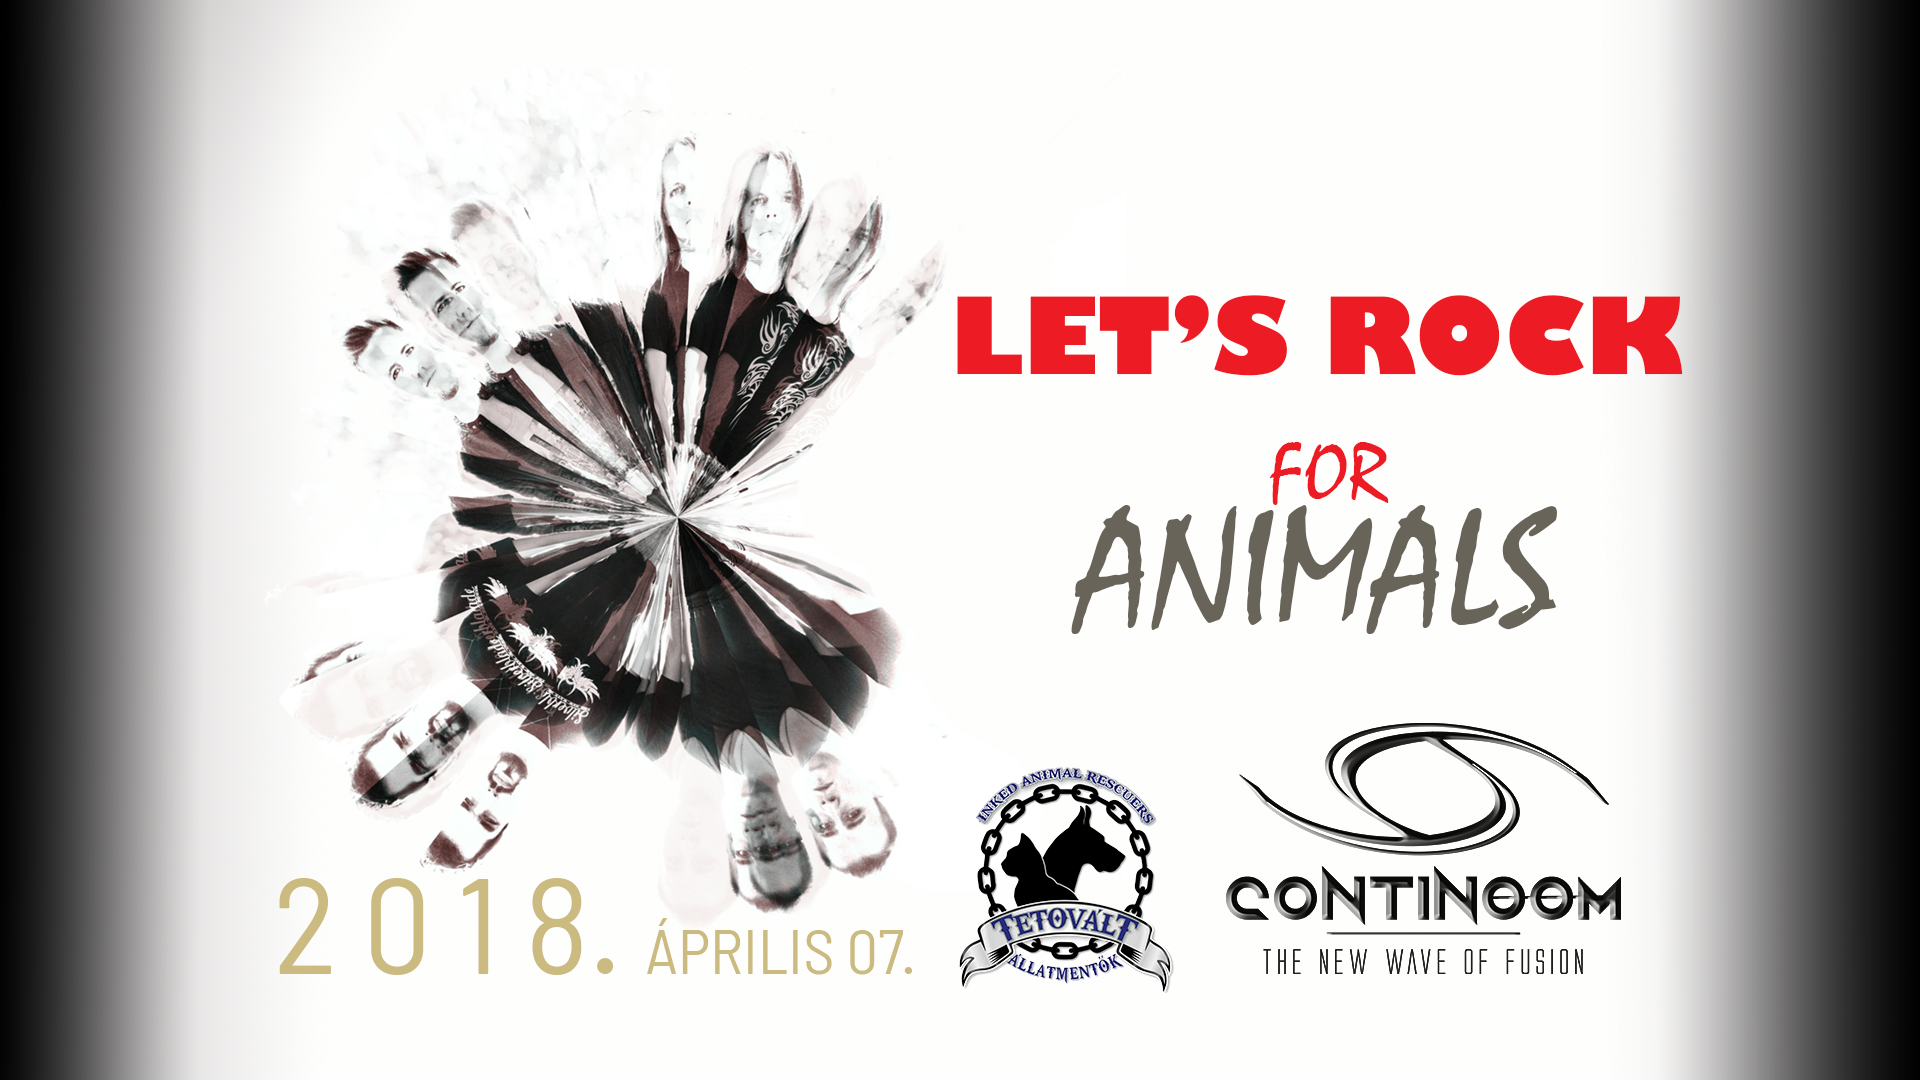 LET’S ROCK FOR ANIMALS!